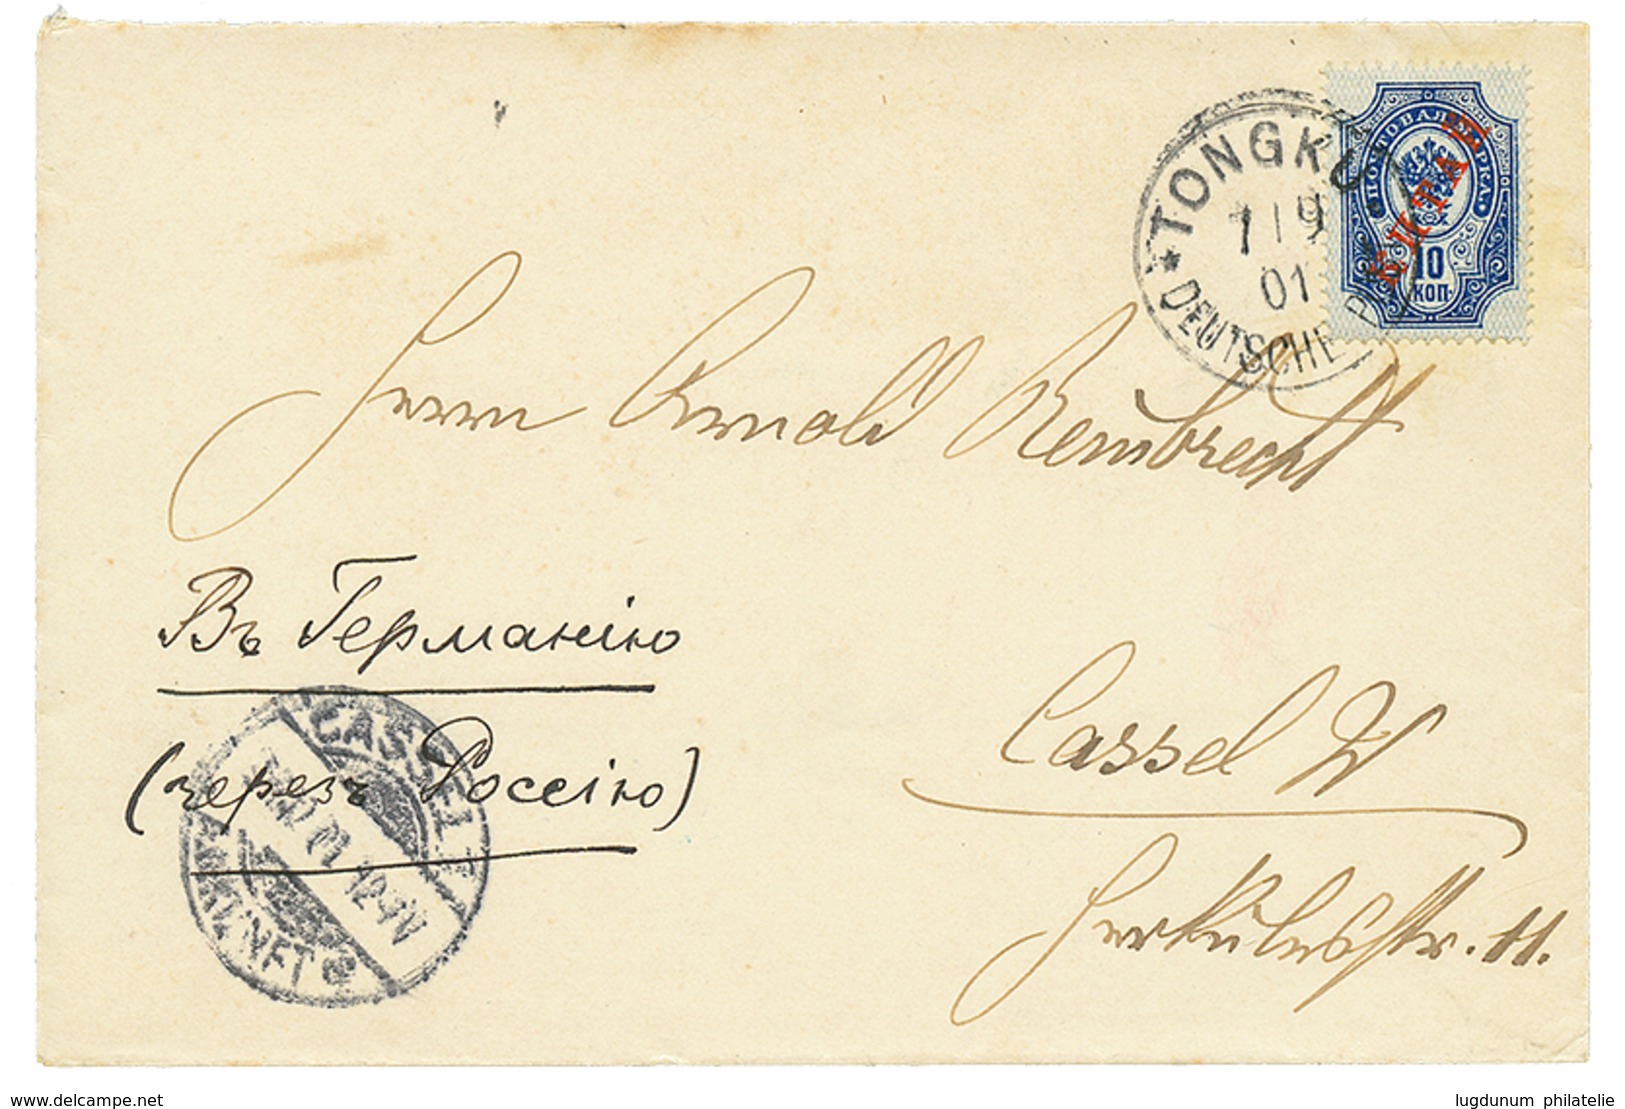 CHINA : 1901 RUSSIA P.O. 10k Canc. TONGKU DEUTSCHE POST On Envelope To GERMANY. RARE. Superb. - Chine (bureaux)